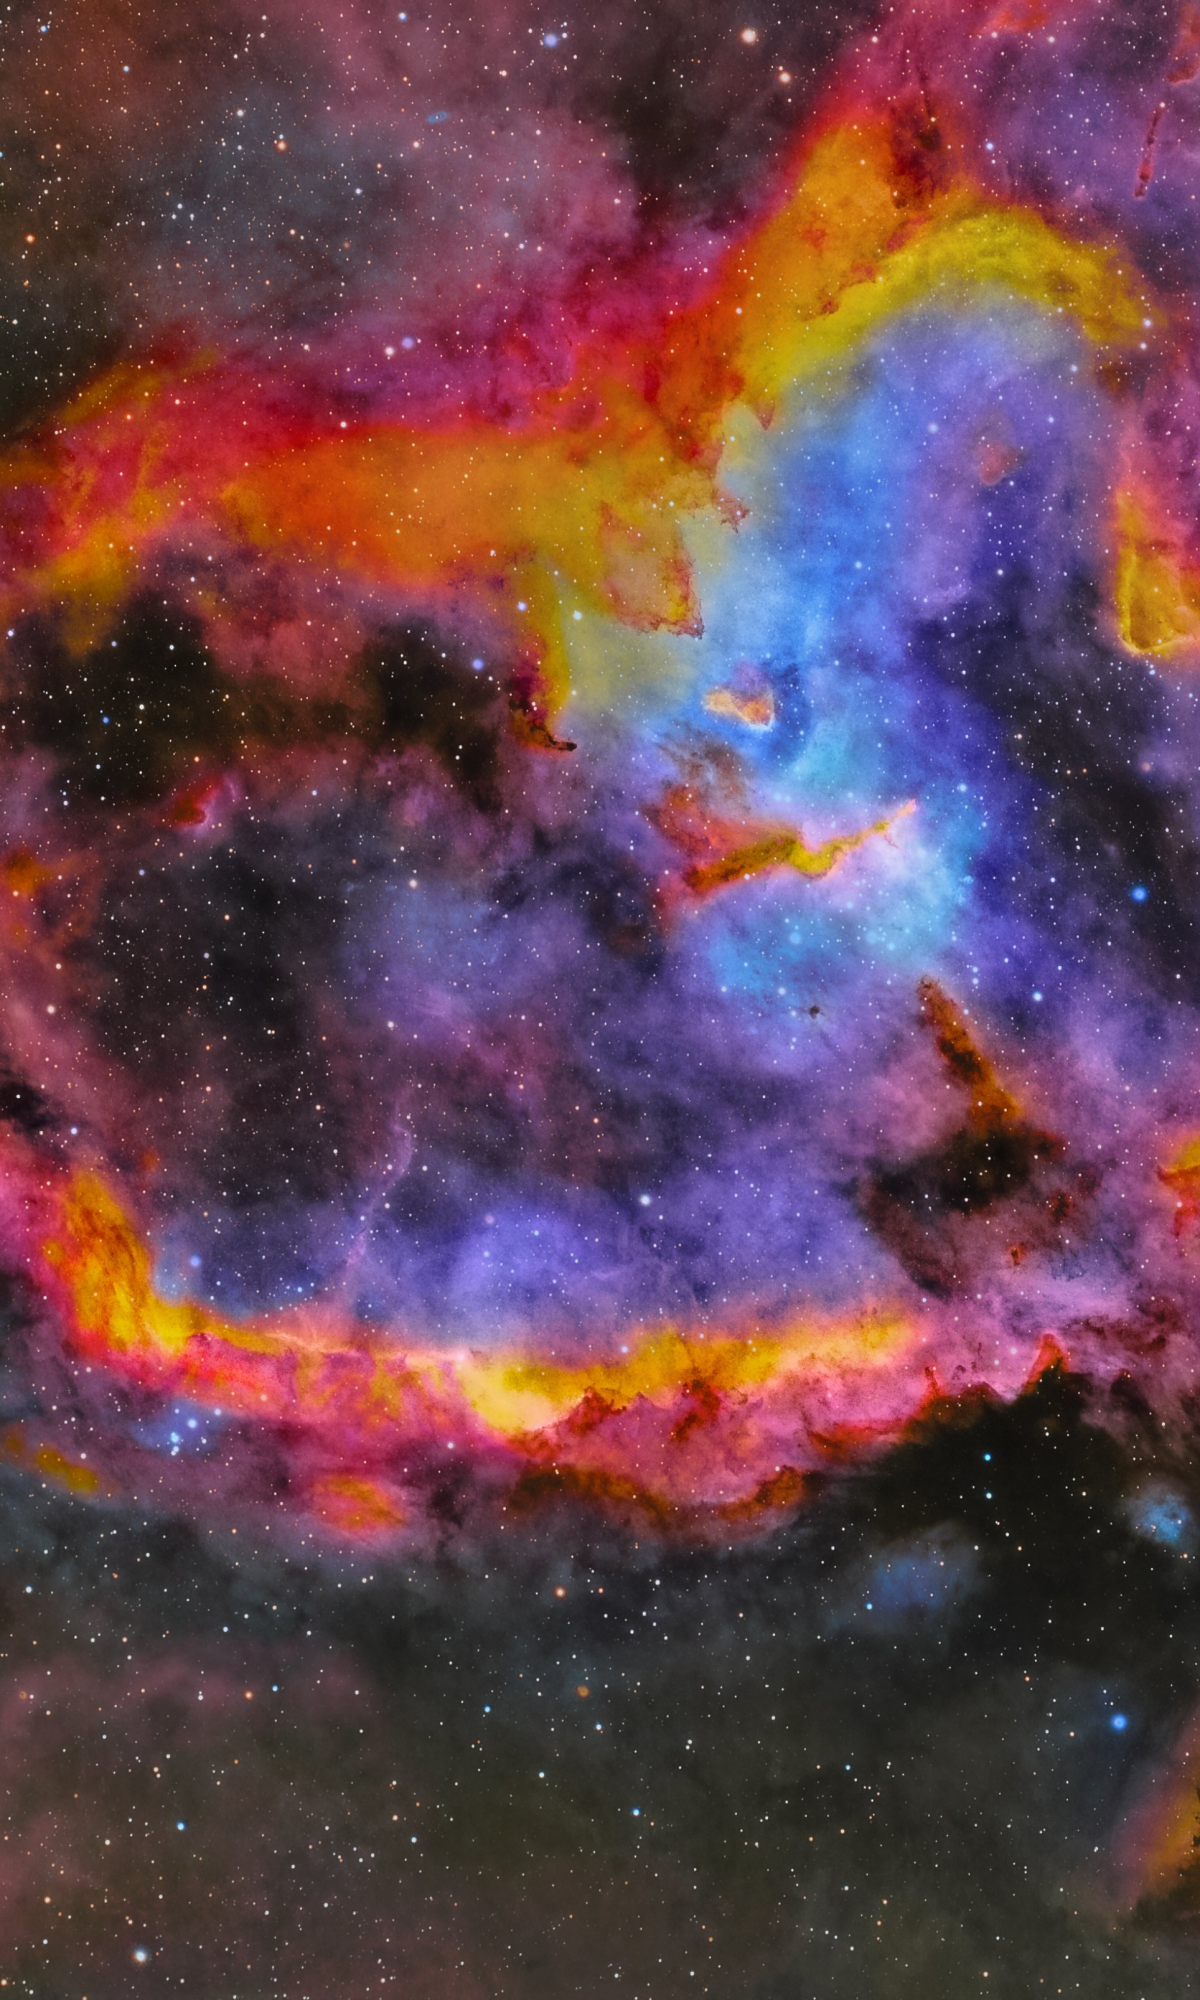 The Heart Nebula (IC 1805 or Sharpless 2-190) by Andrew McCarthy